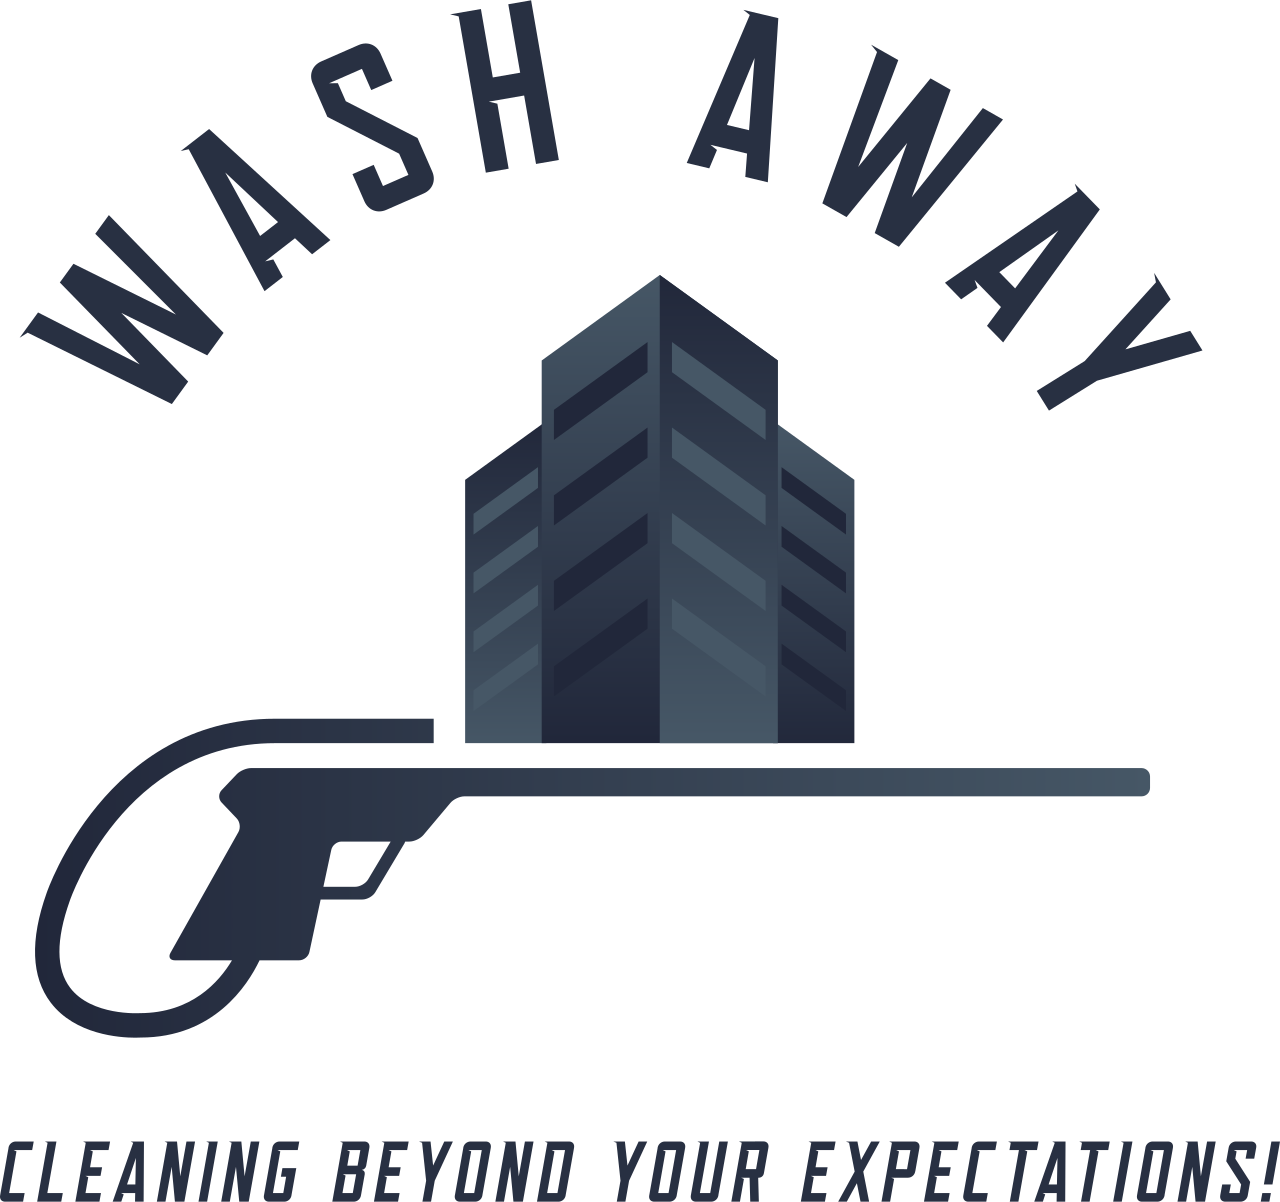 WASH AWAY's web page